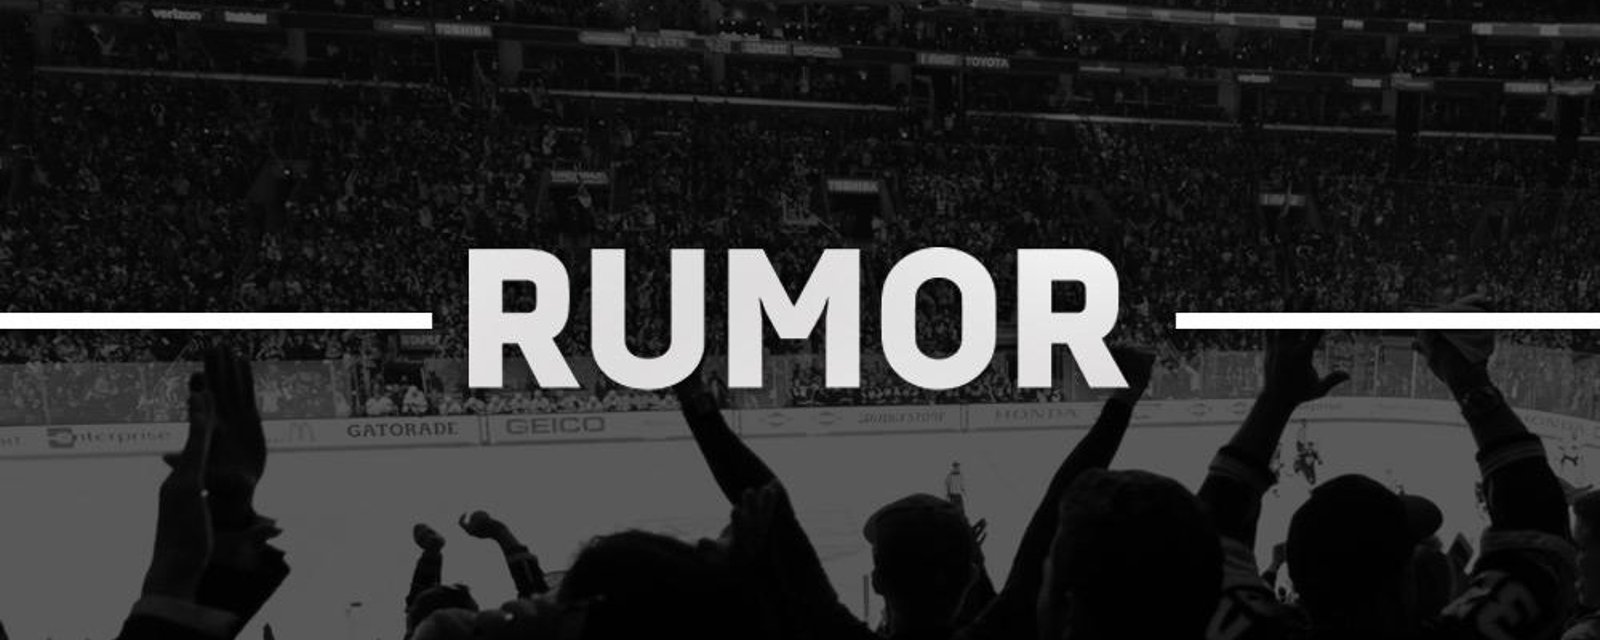 Rumor: NHL owners of struggling team looking to sell their shares.